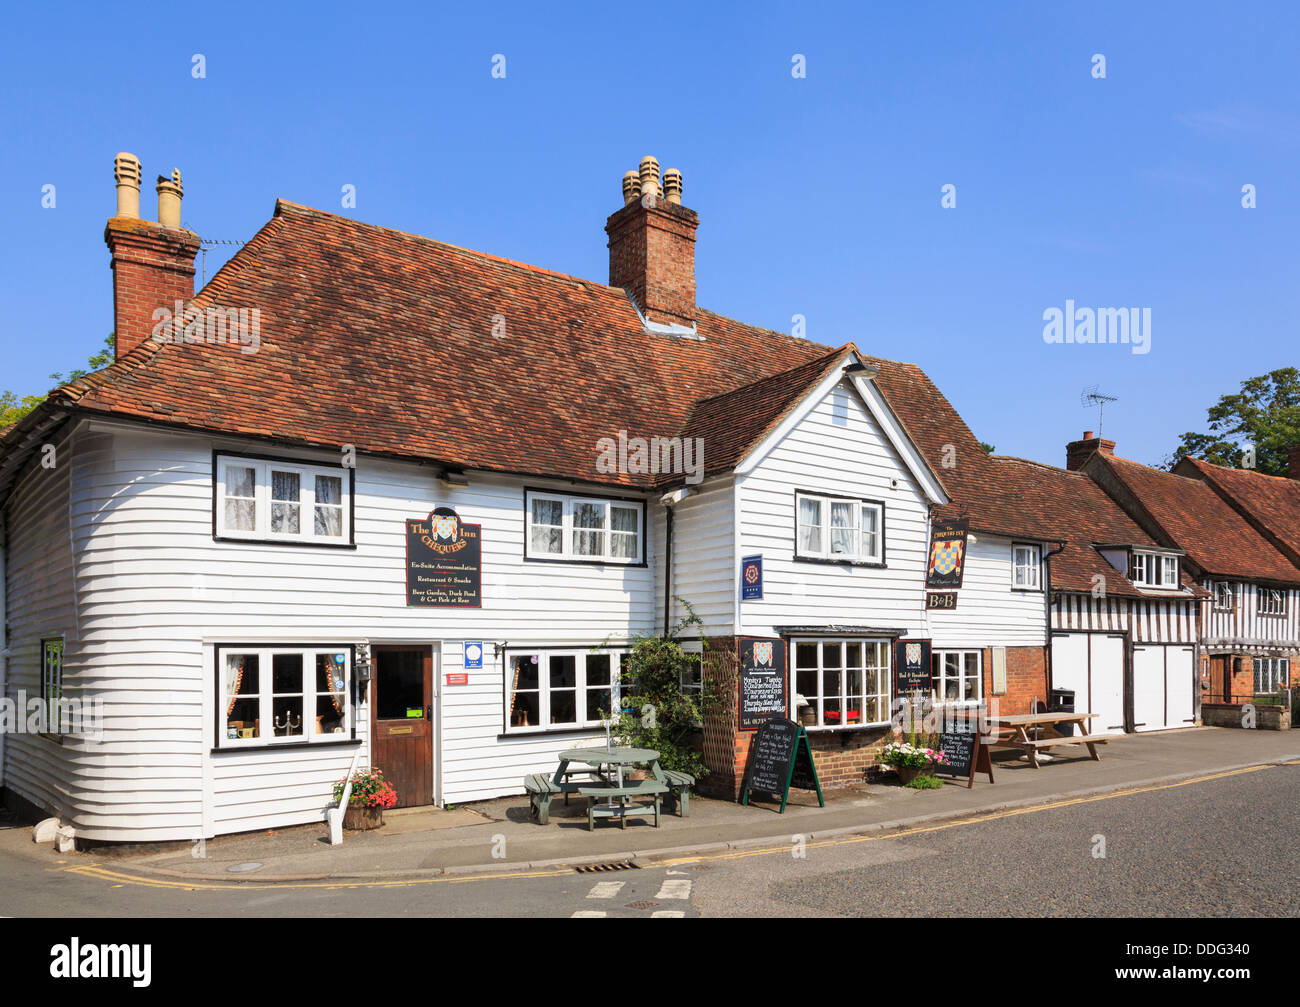 The Chequers 14th century coaching Inn in a typical white clapboard Kentish period building in picturesque village. Smarden Kent England UK Britain Stock Photo